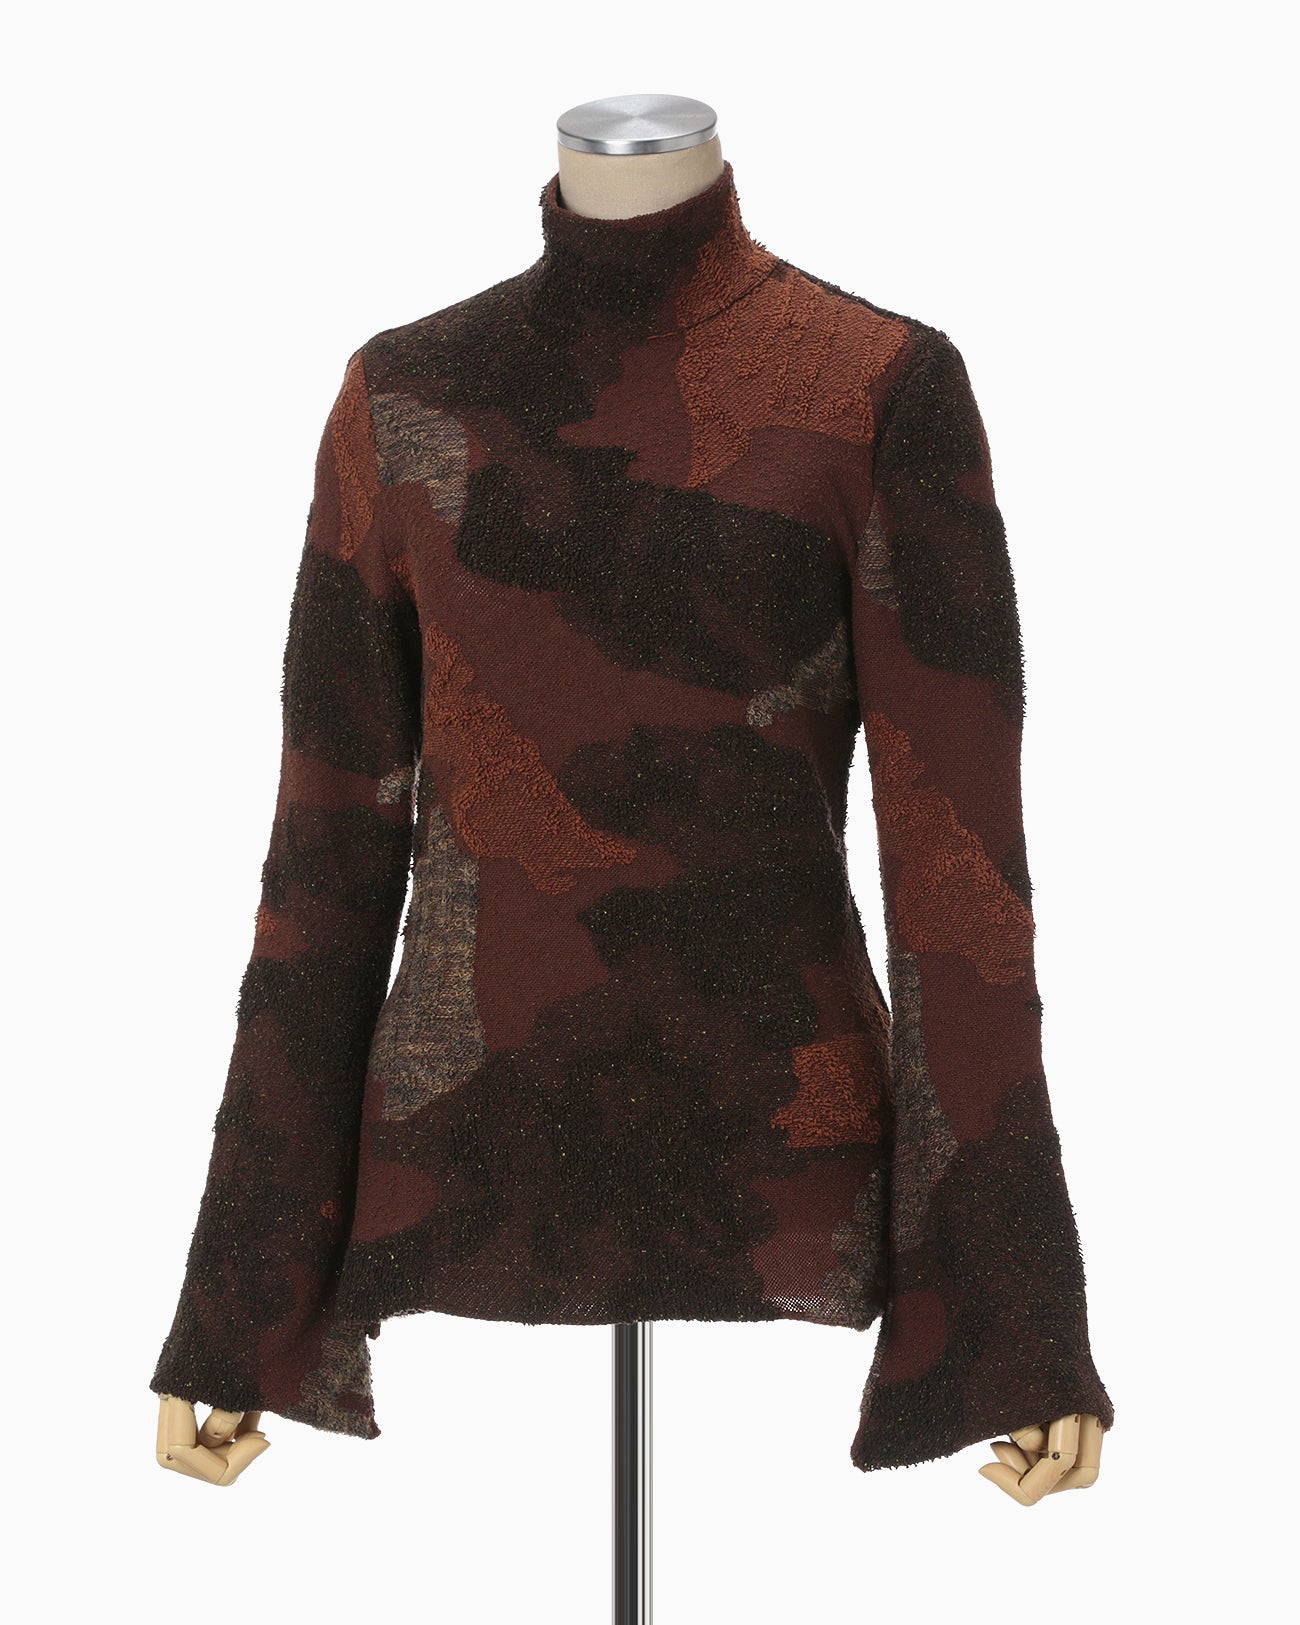 Pile Jacquard Knitted High Neck Top - brown